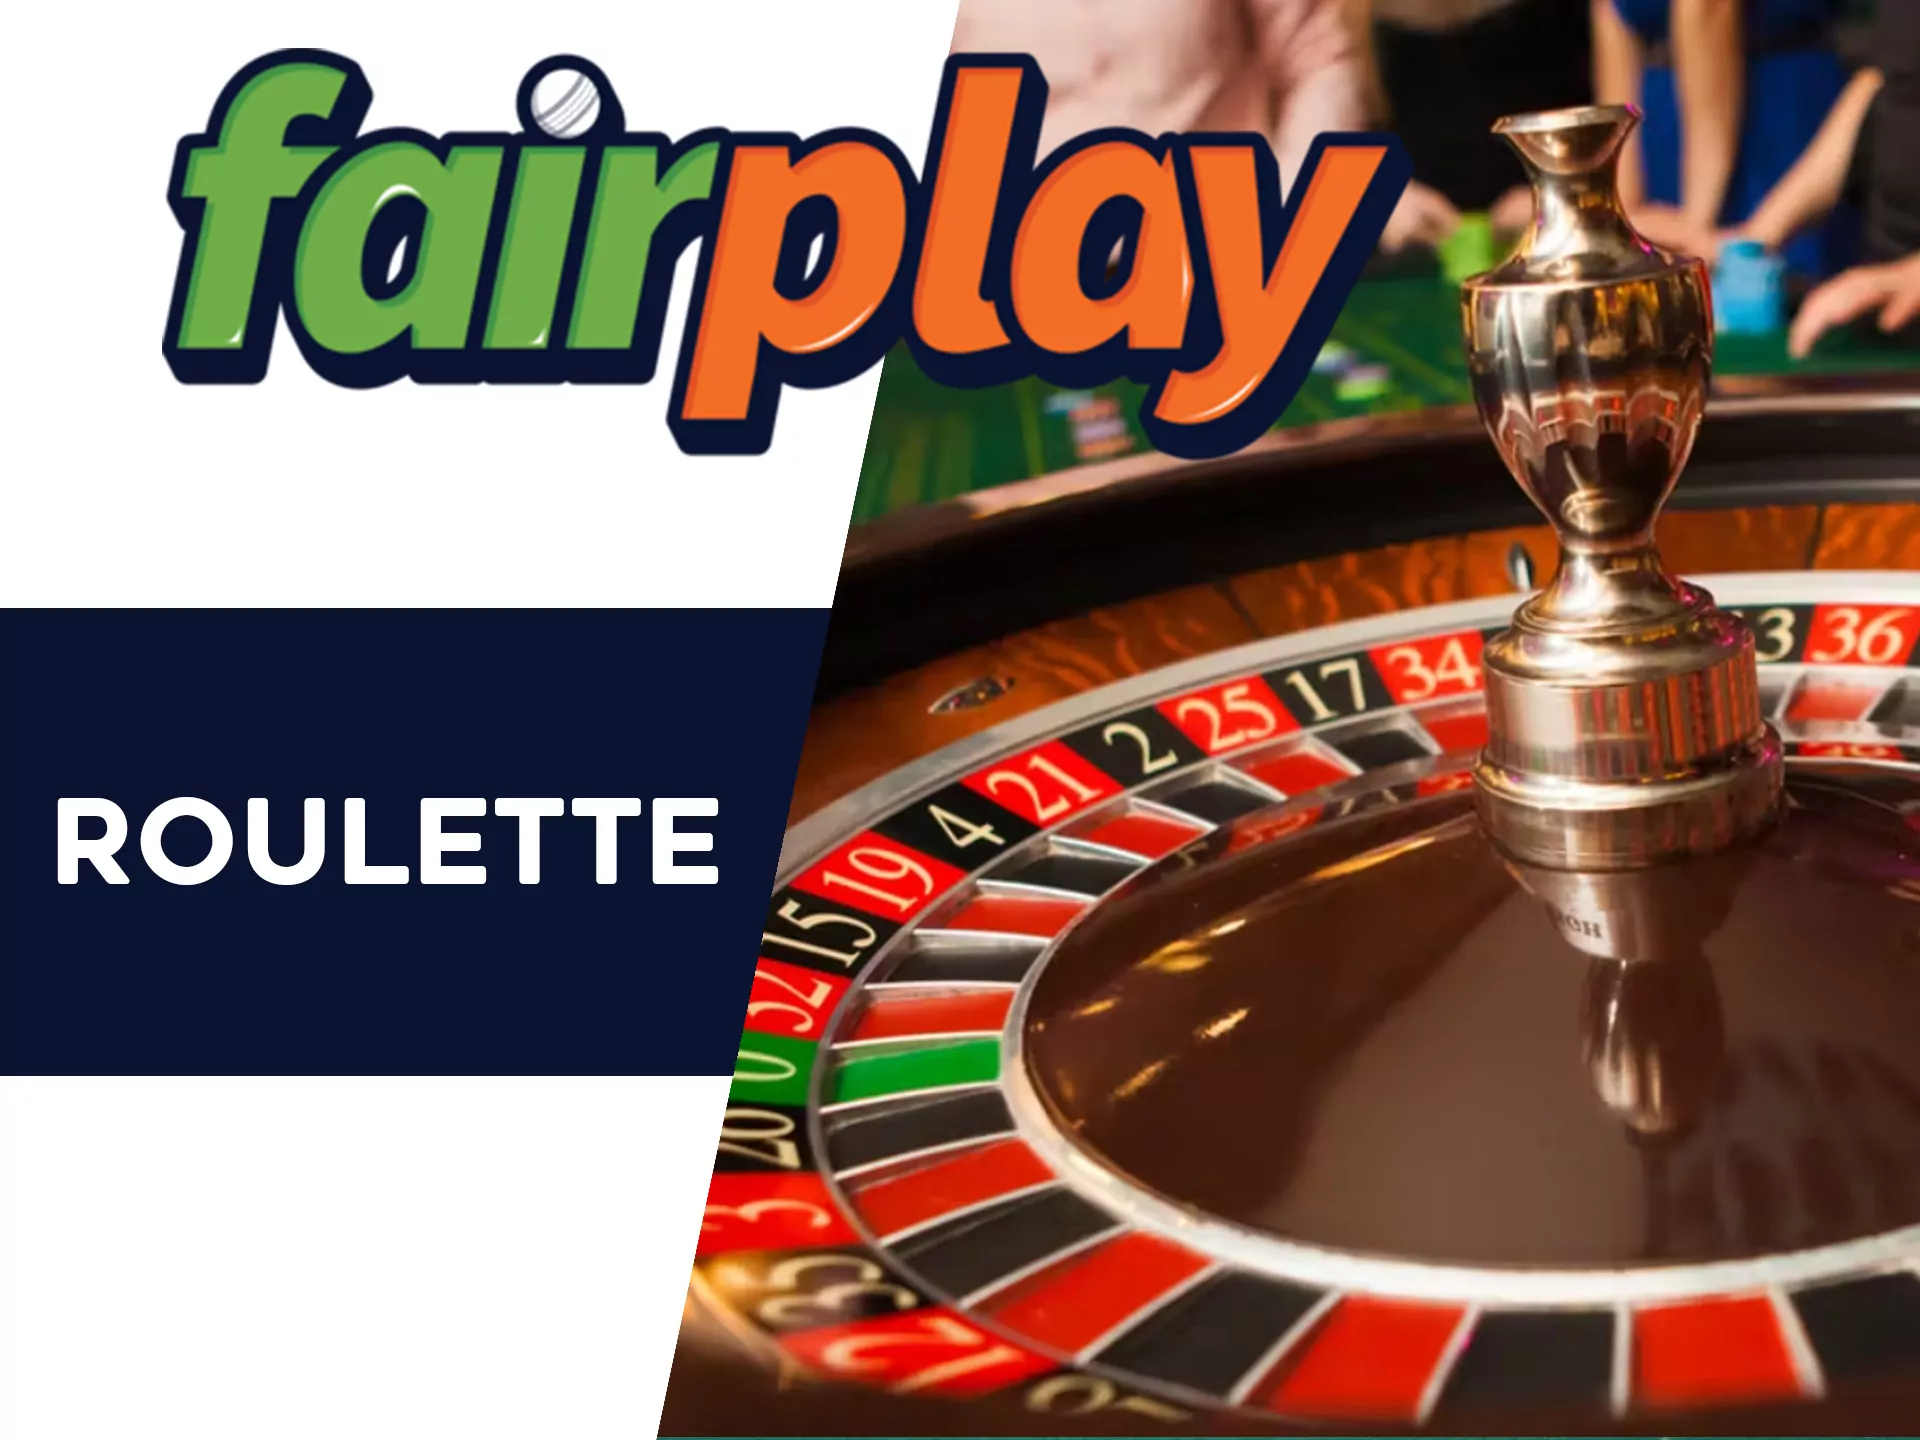 Play roulette at Fairplay and win big prizes.